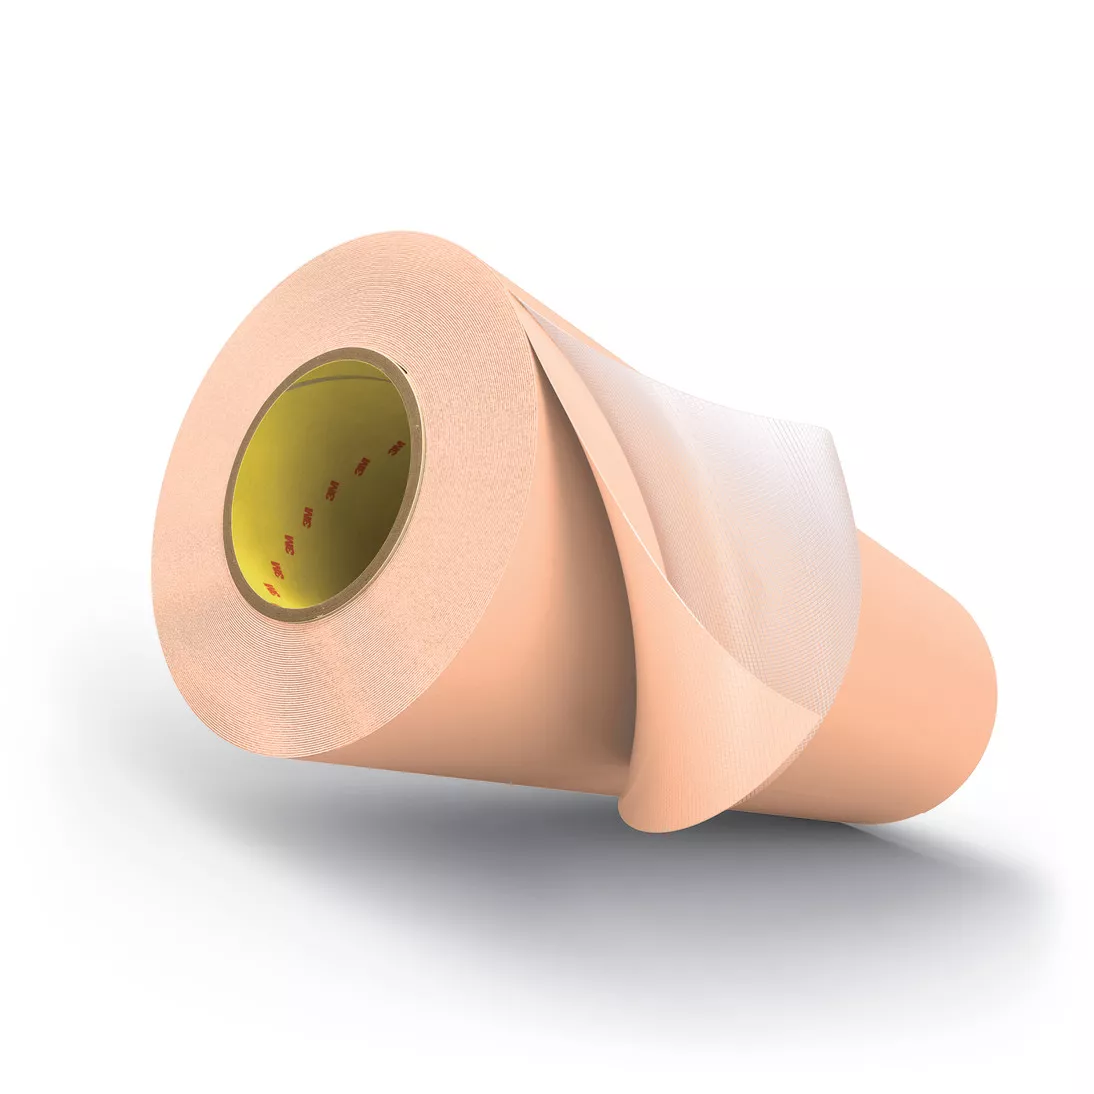 3M™ Cushion-Mount™ Plus Plate Mounting Tape E1120, Tan, 18 in x 25 yd,
20 mil, 1 roll per case